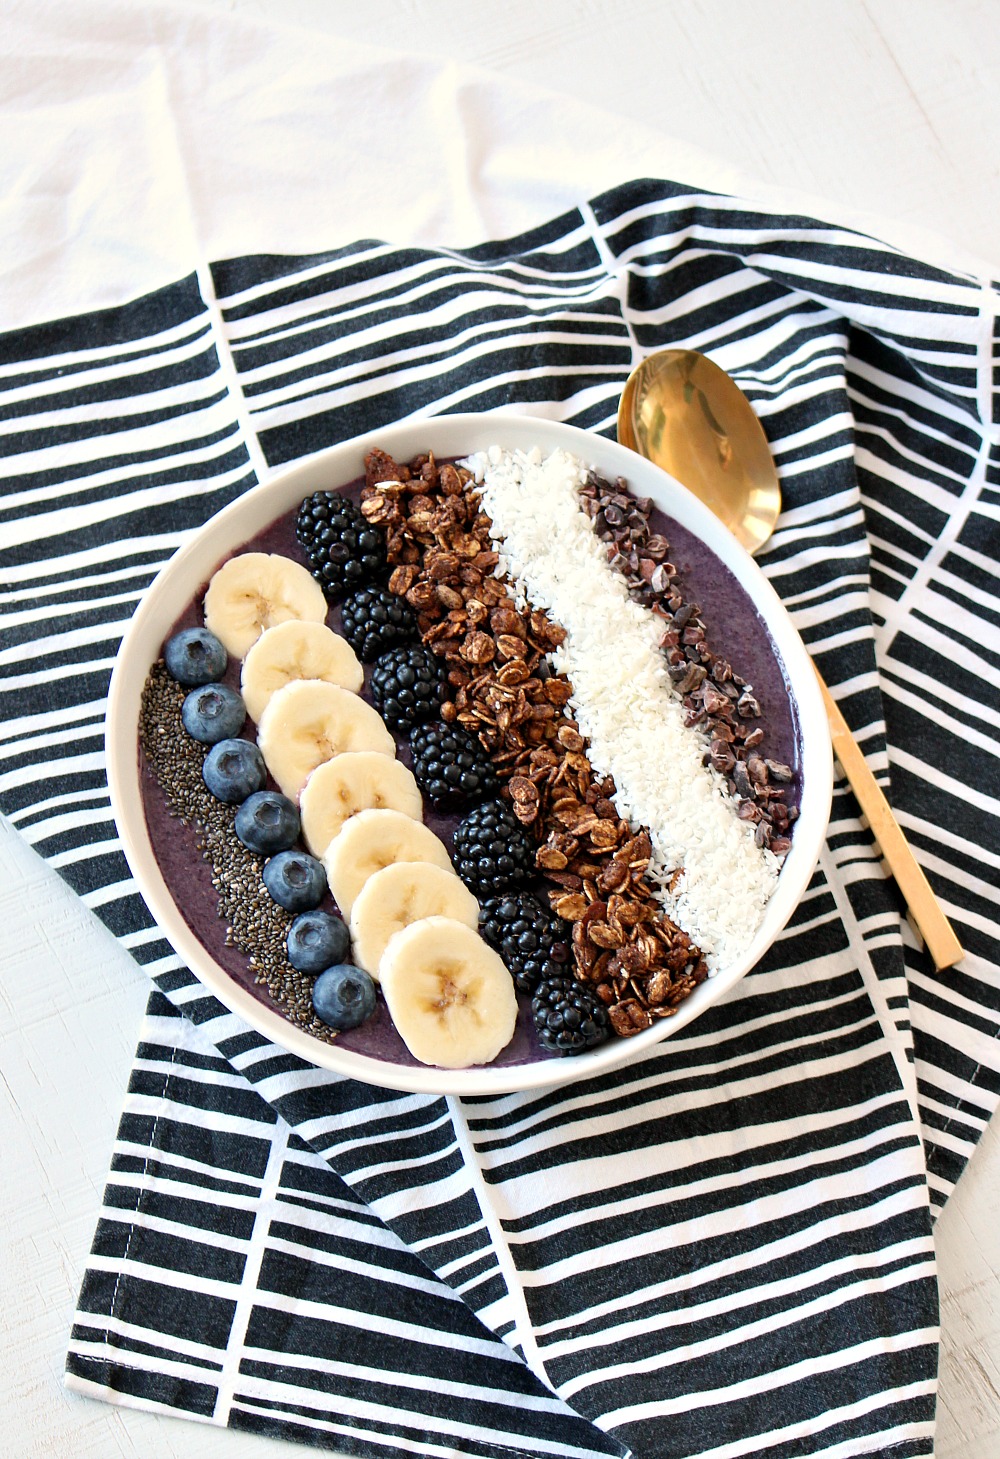 Smoothie Bowl Recipes for Summer